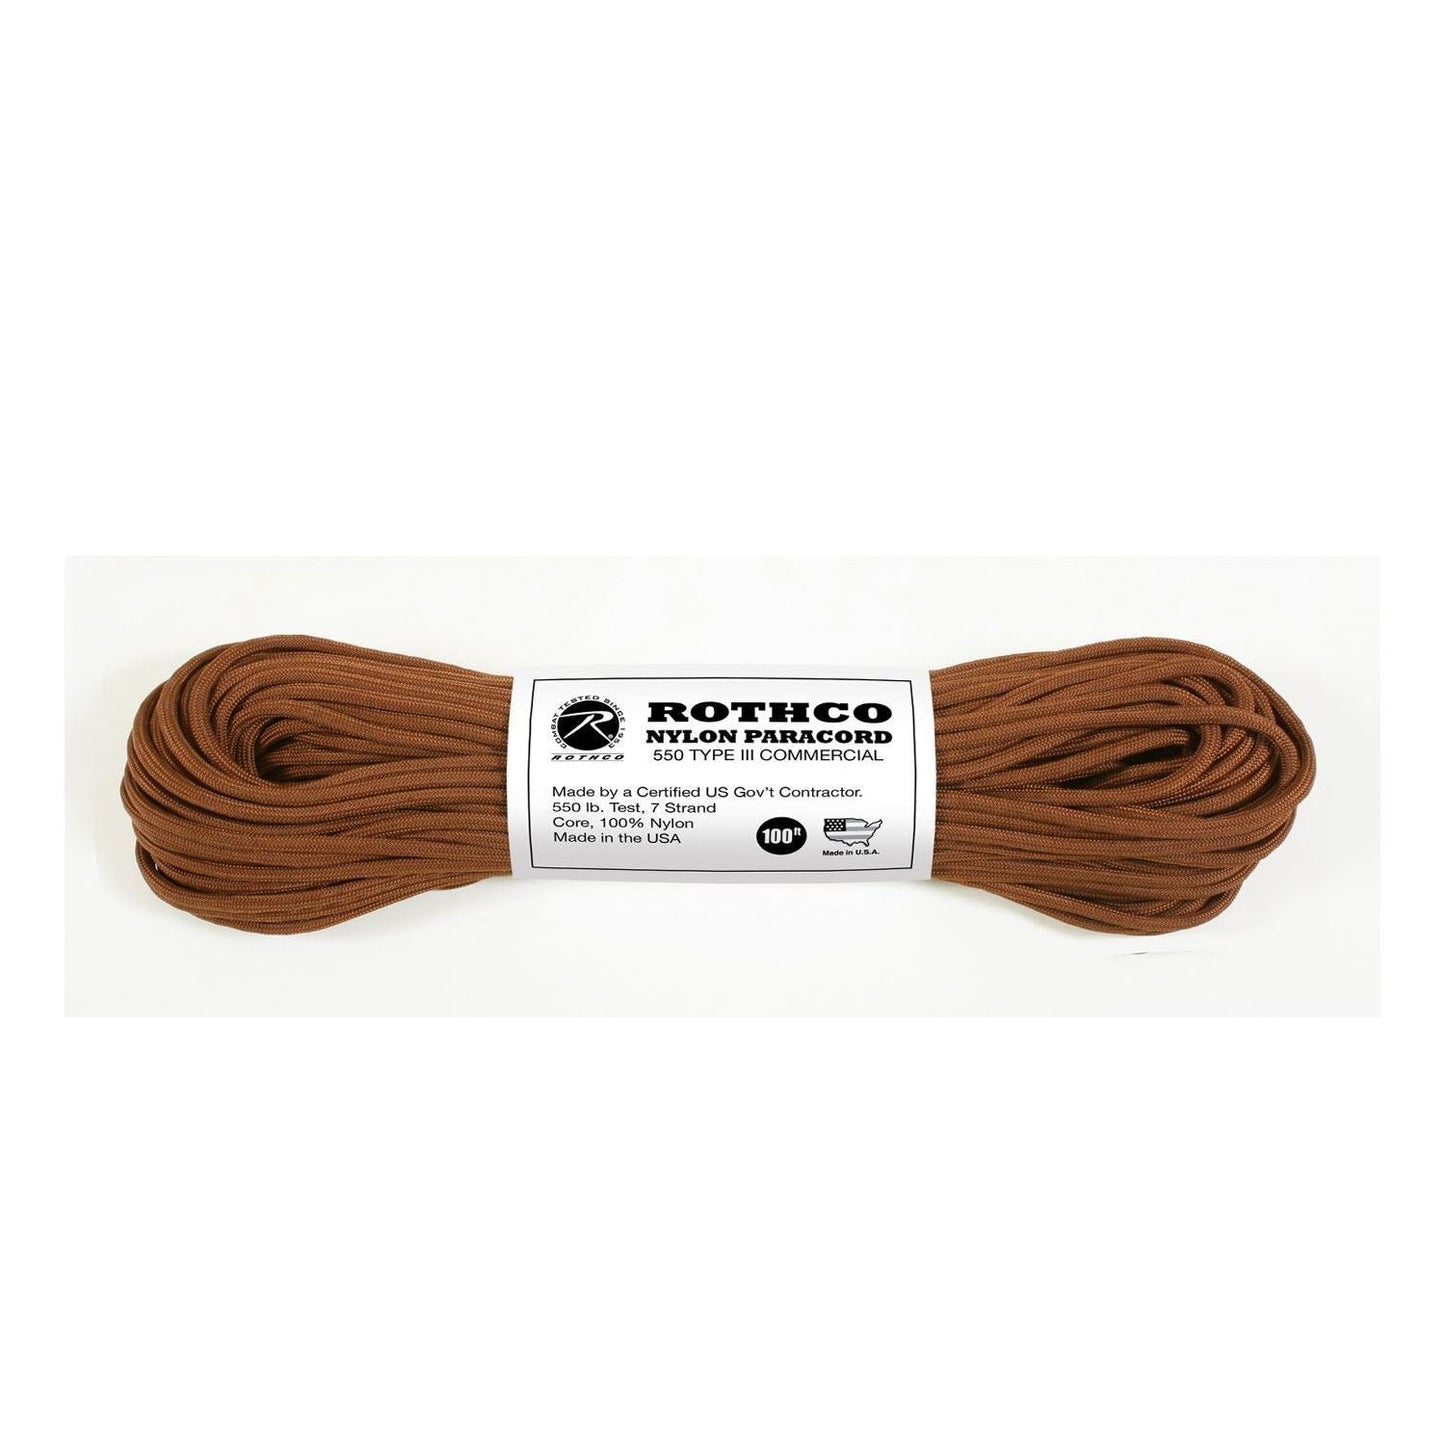 Nylon Paracord - Chocolate Brown 100ft Type III 550 lb. (5 Per Pack)